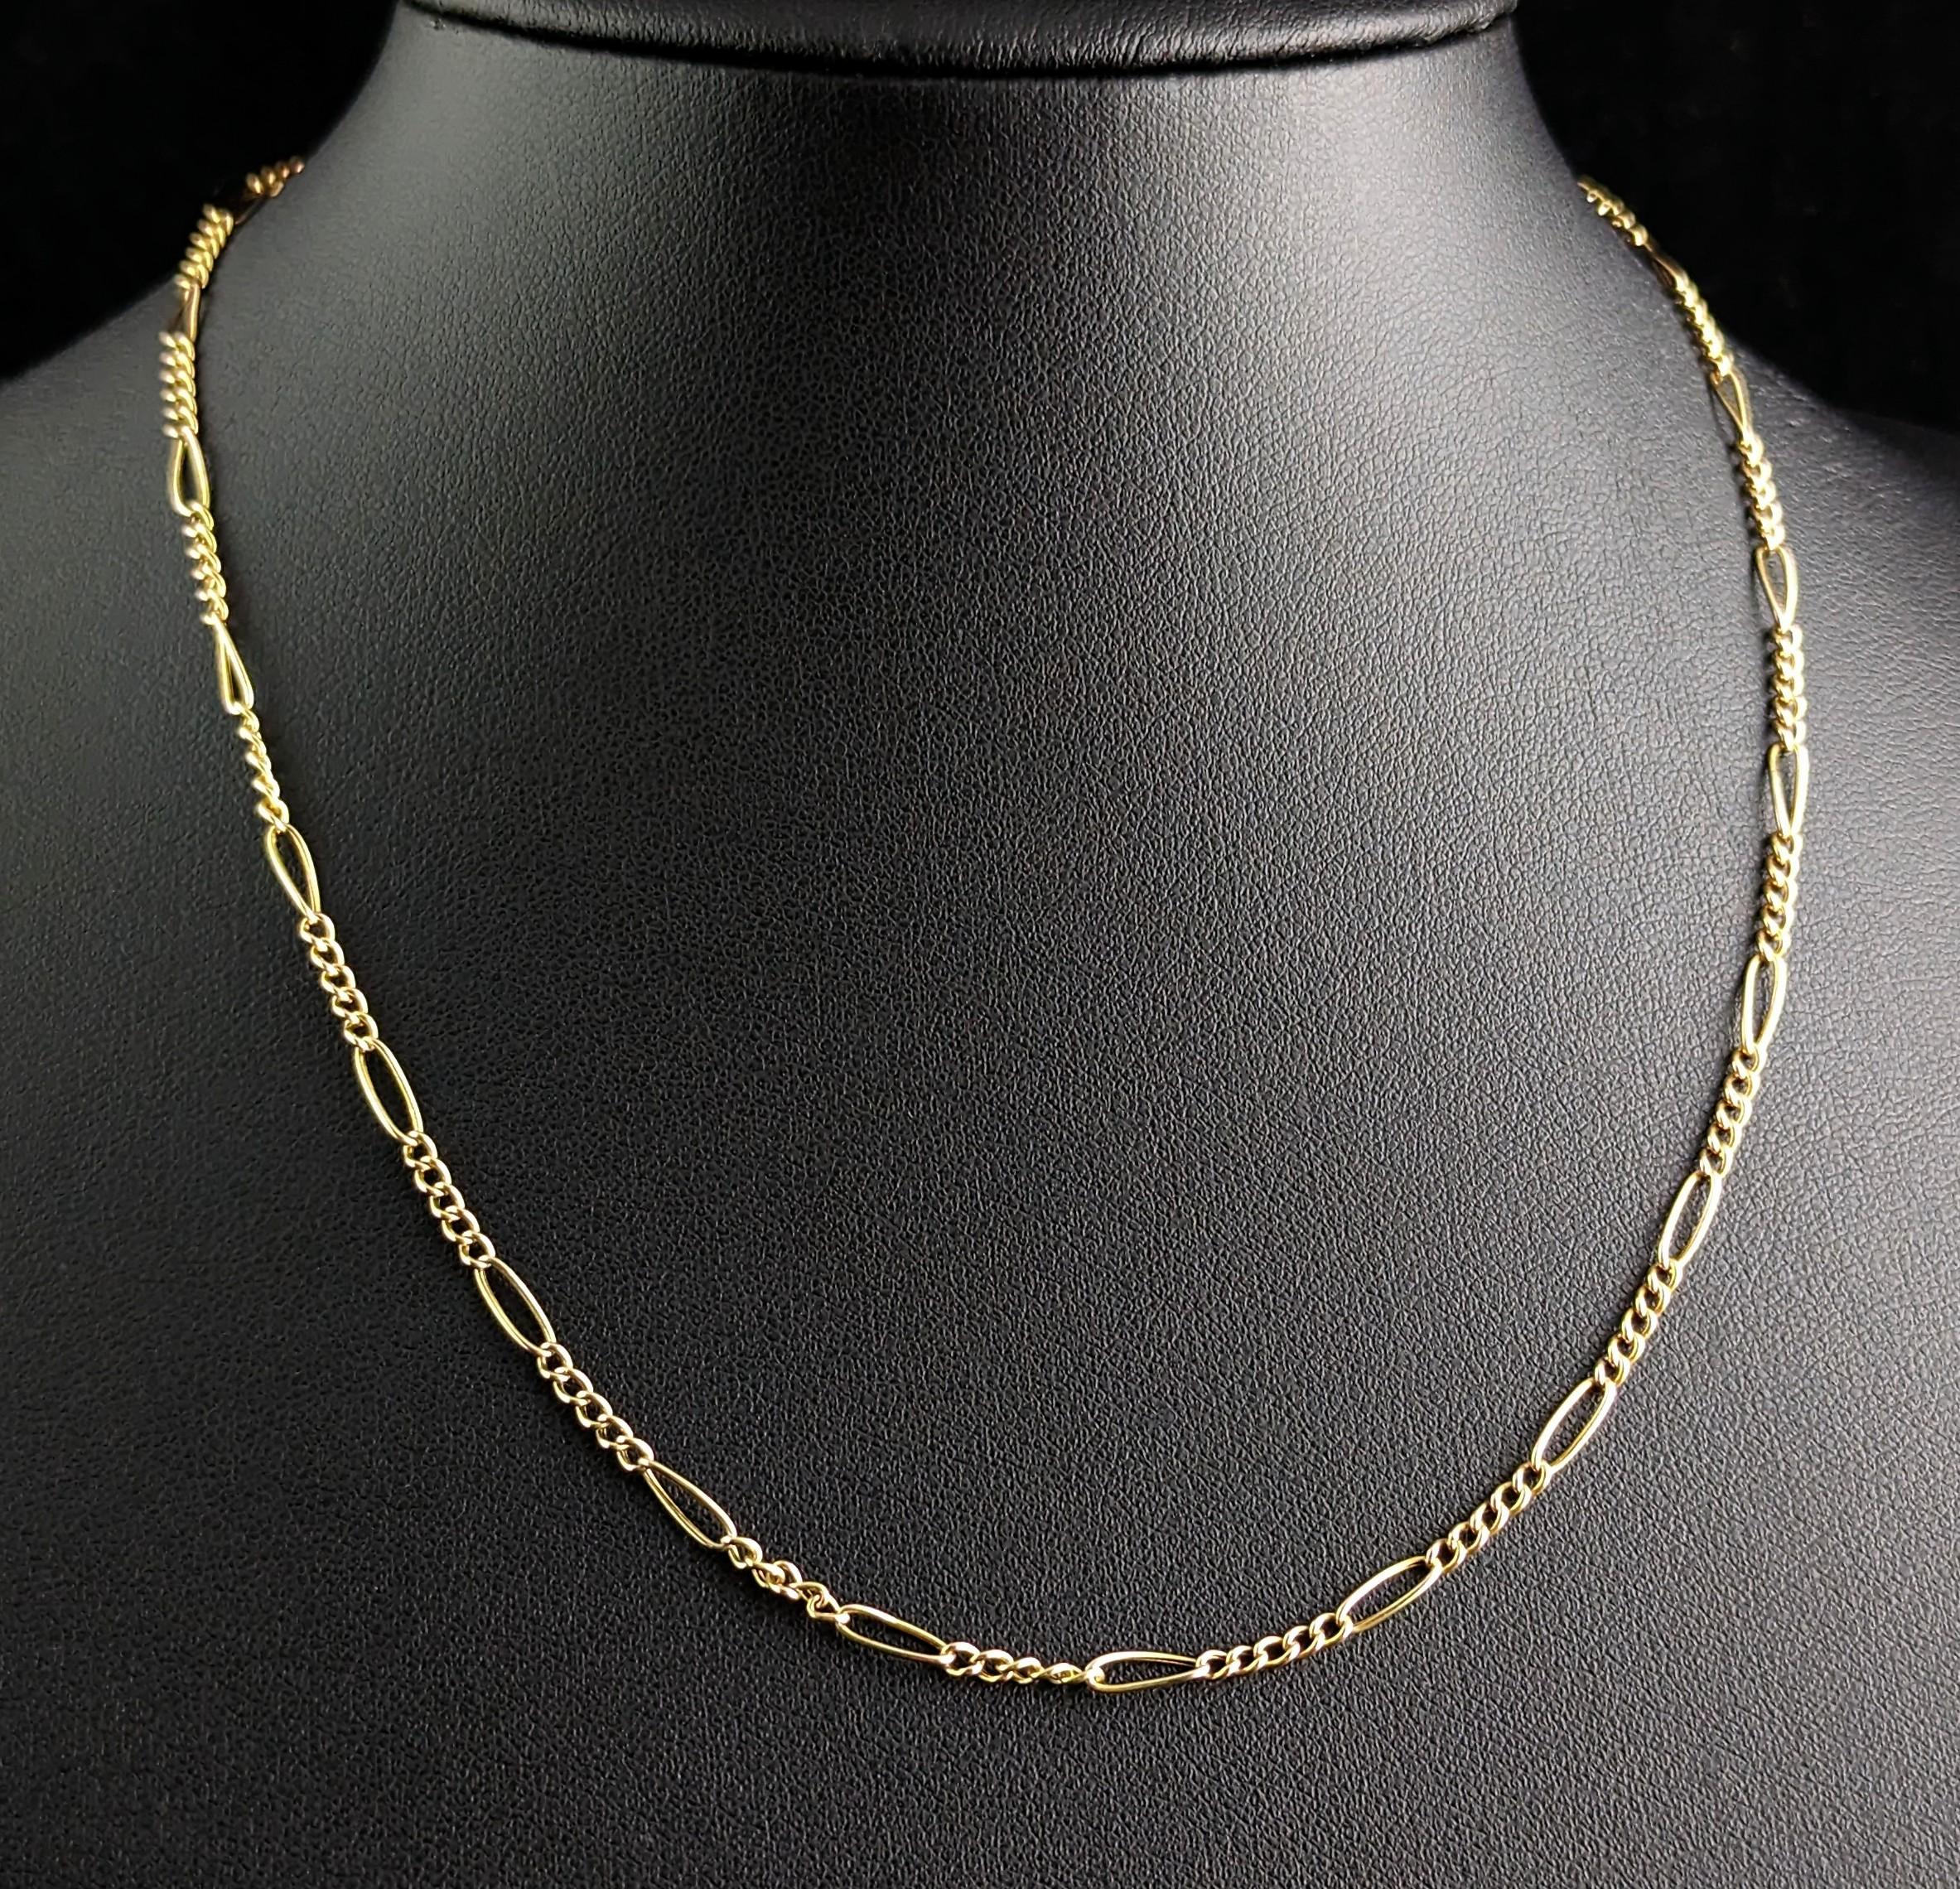 You can't go wrong with the staple that is an antique gold chain.

These are one of the most versatile and wearable pieces of antique jewellery and also one of the most sought after and you can see why.

It has lovely Figaro links with in rich